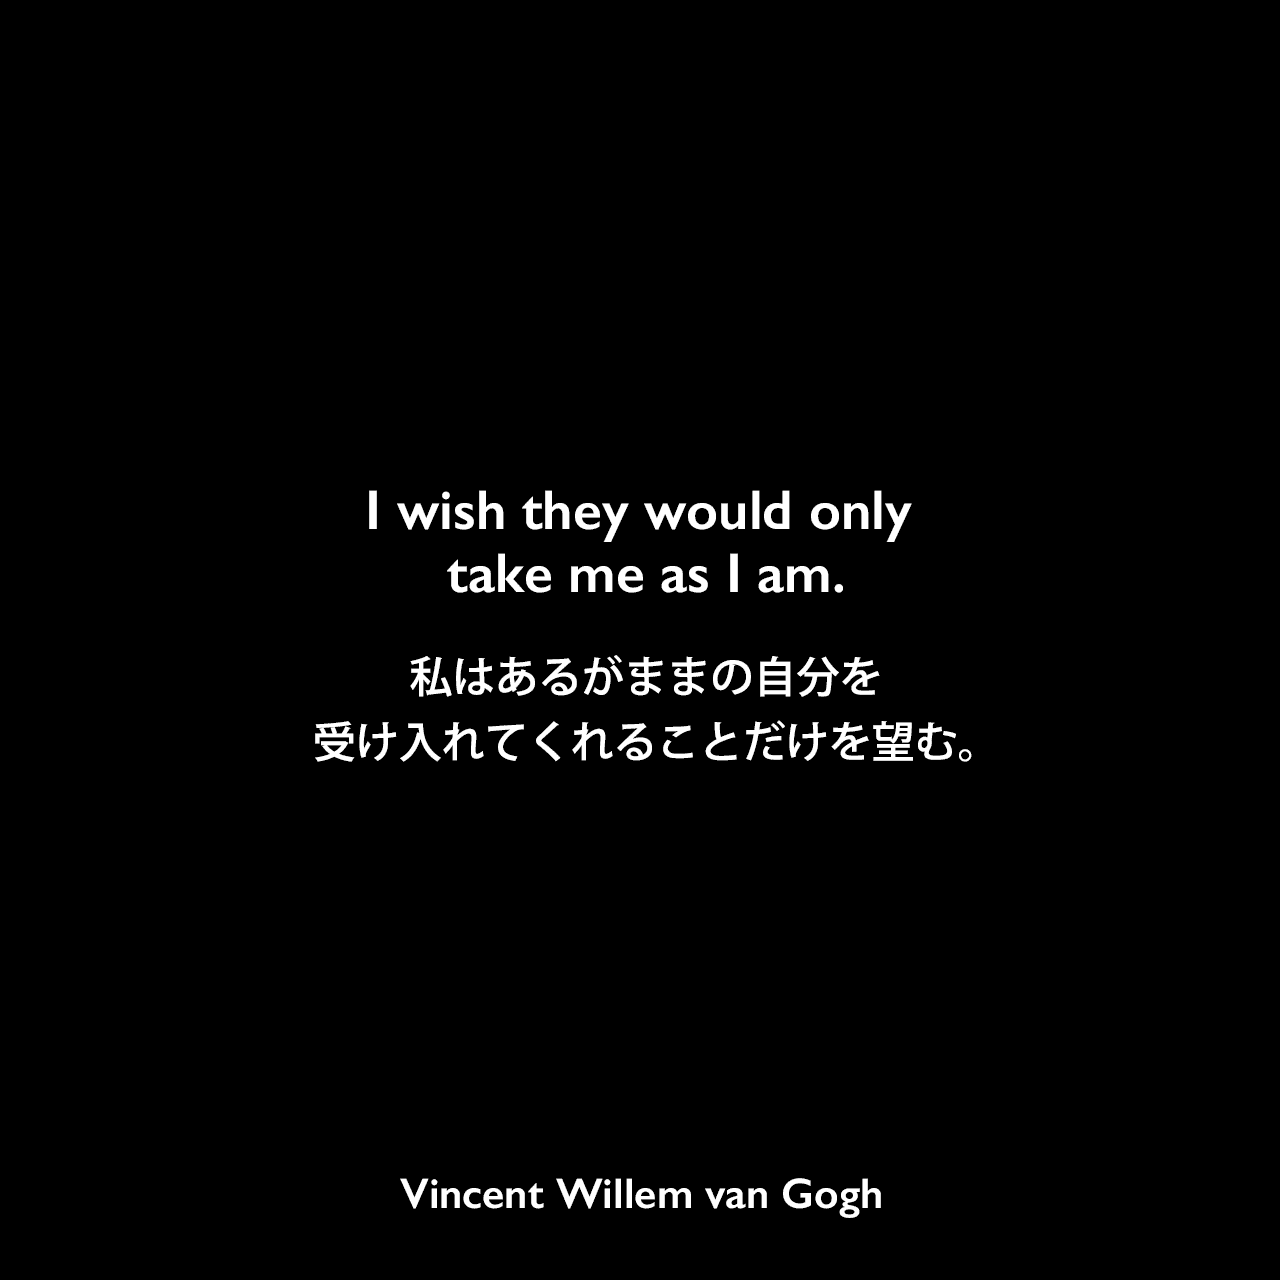 I wish they would only take me as I am.私はあるがままの自分を受け入れてくれることだけを望む。Vincent Willem van Gogh